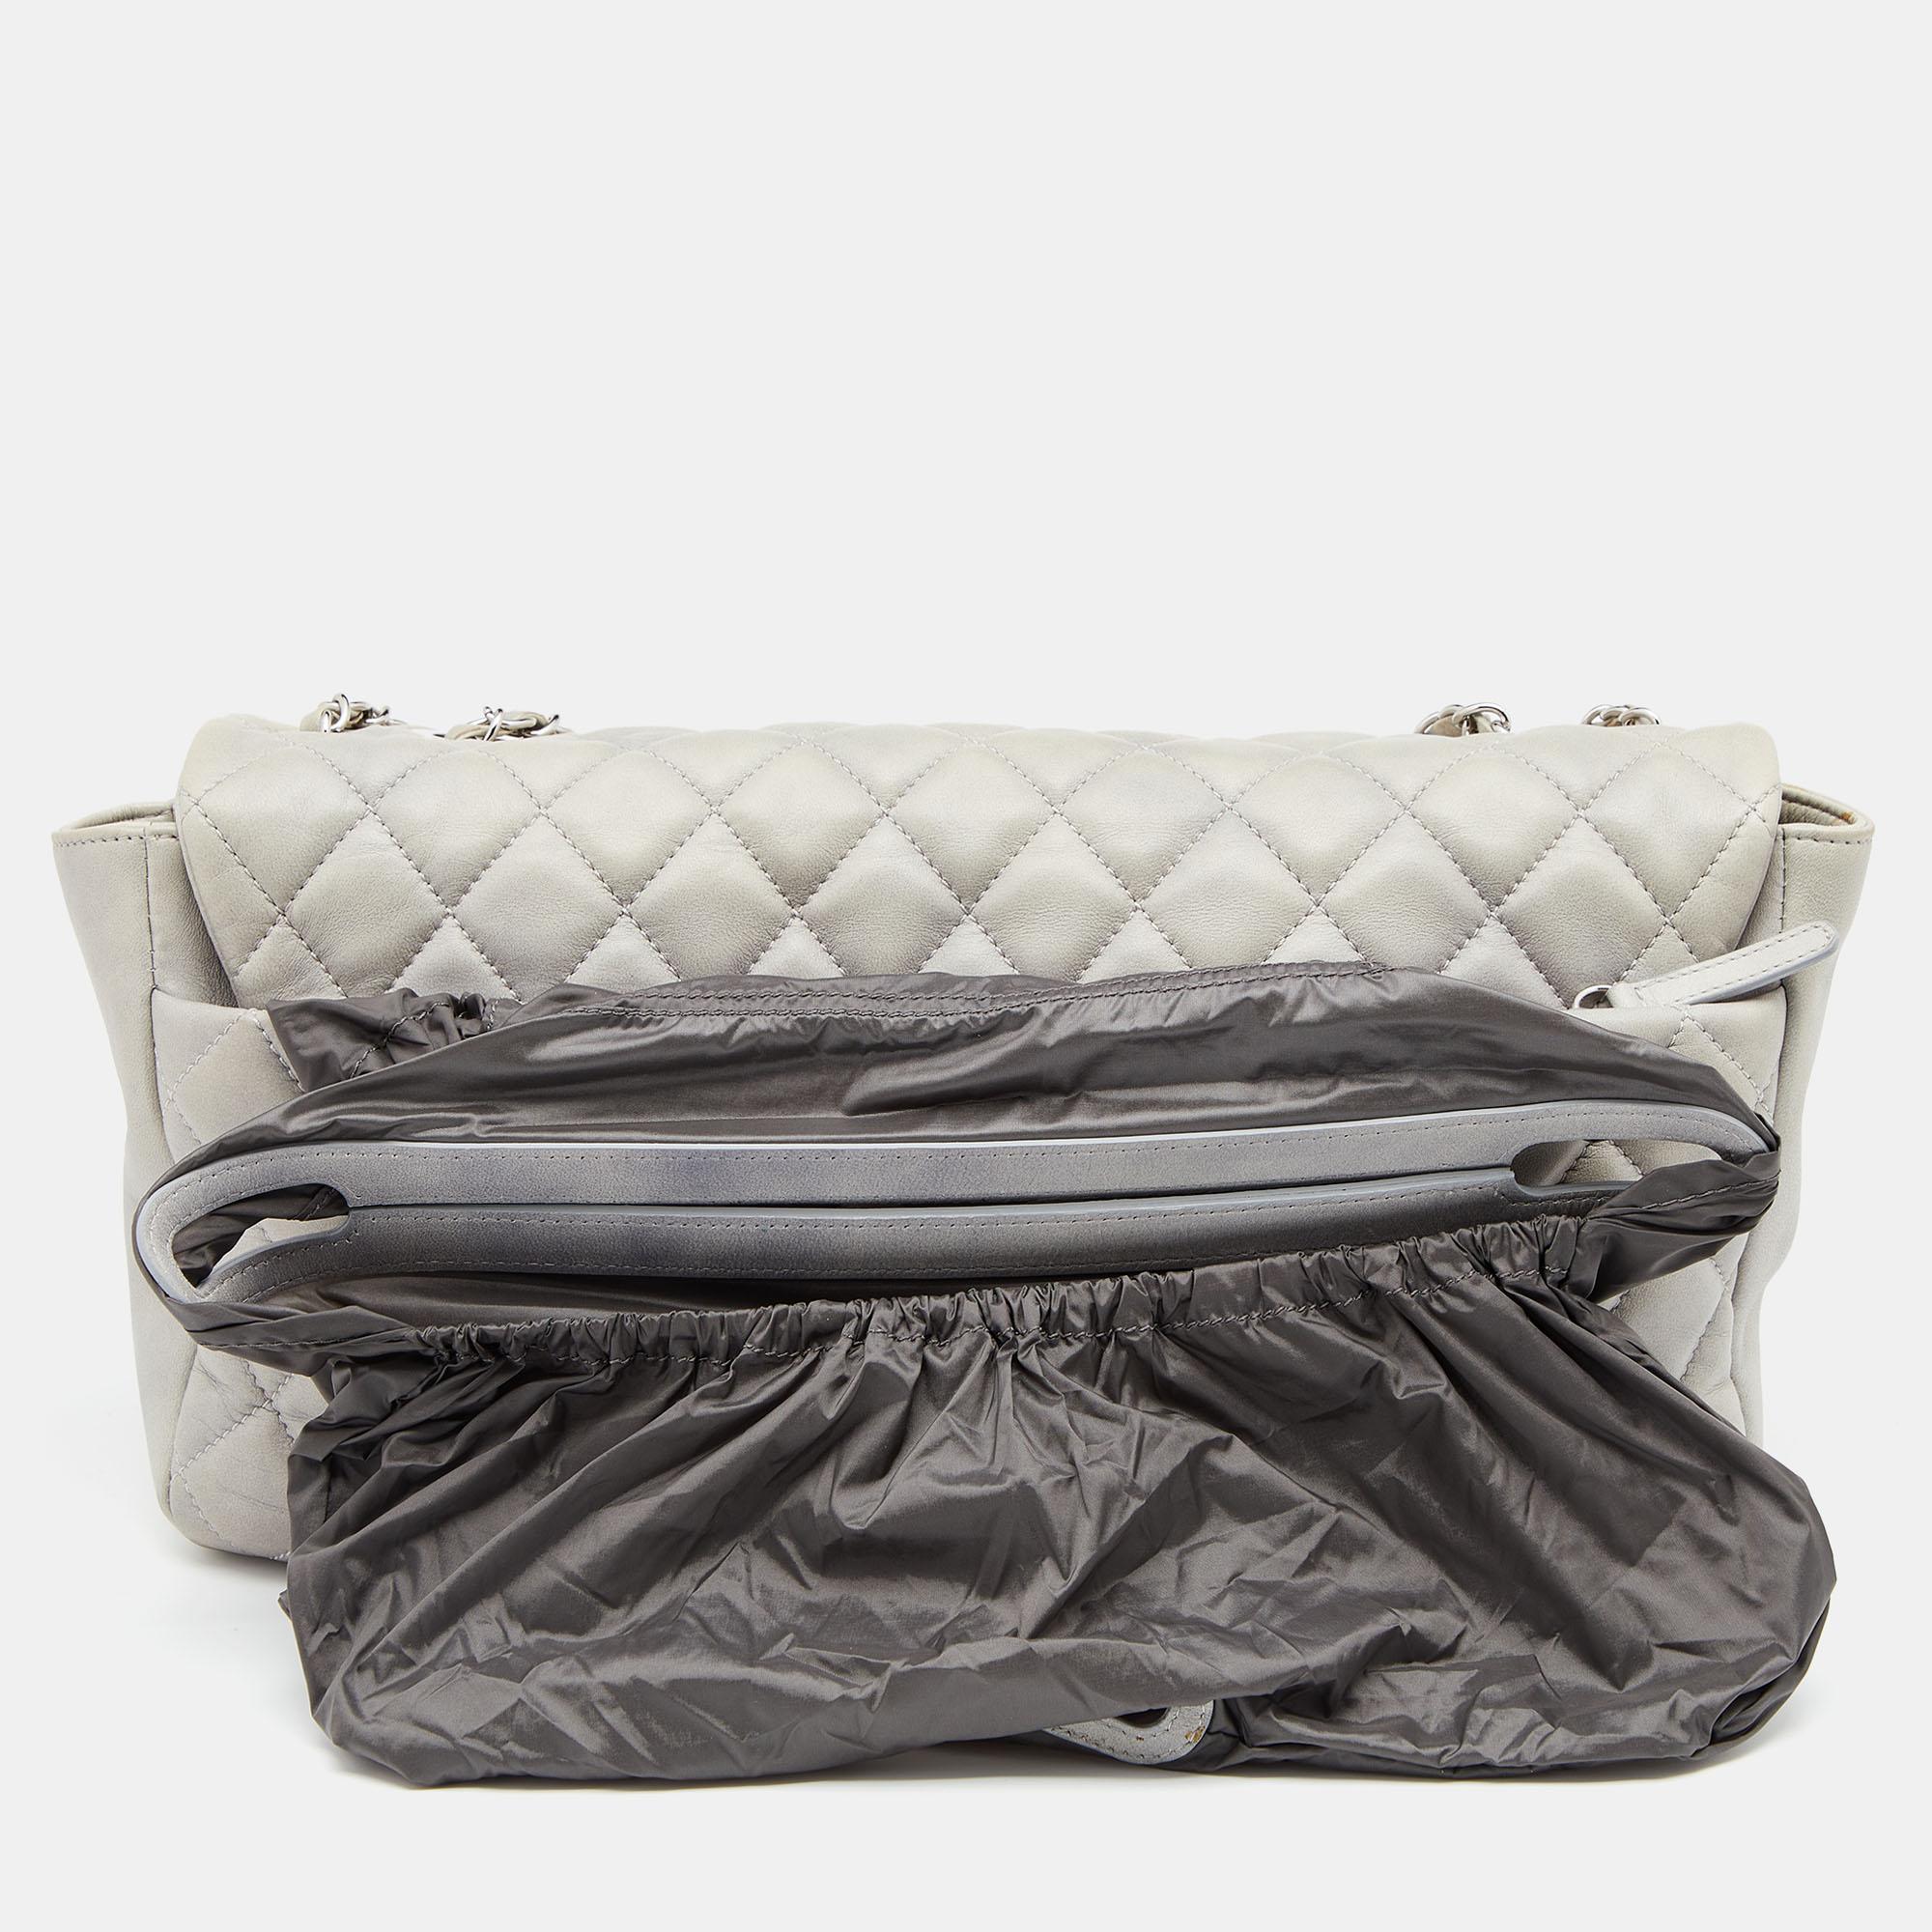 Women's Chanel Grey Quilted Leather Maxi Classic Flap Bag